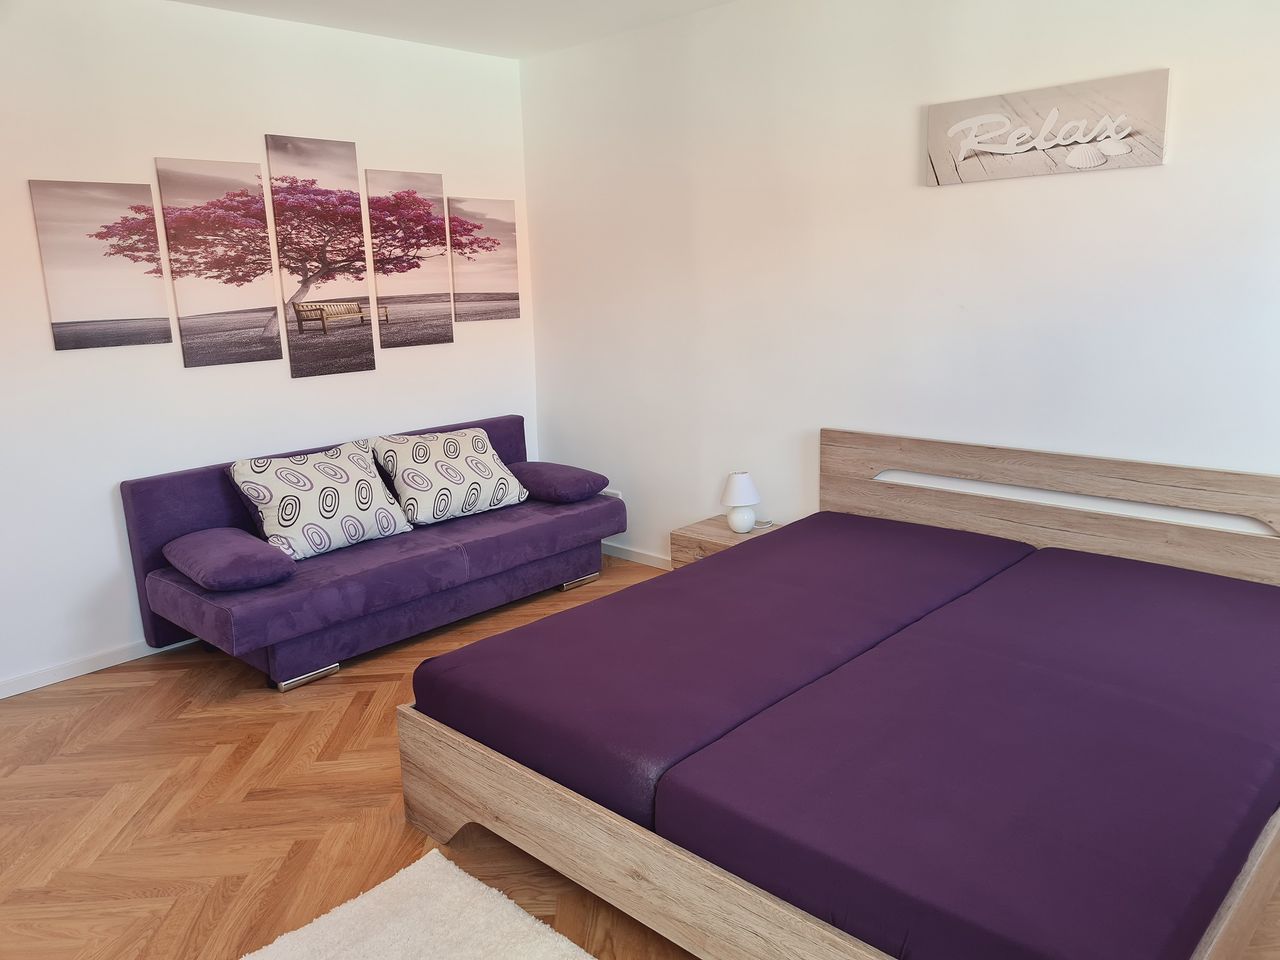 Furnished 2.5 room apartment in a renovated old building